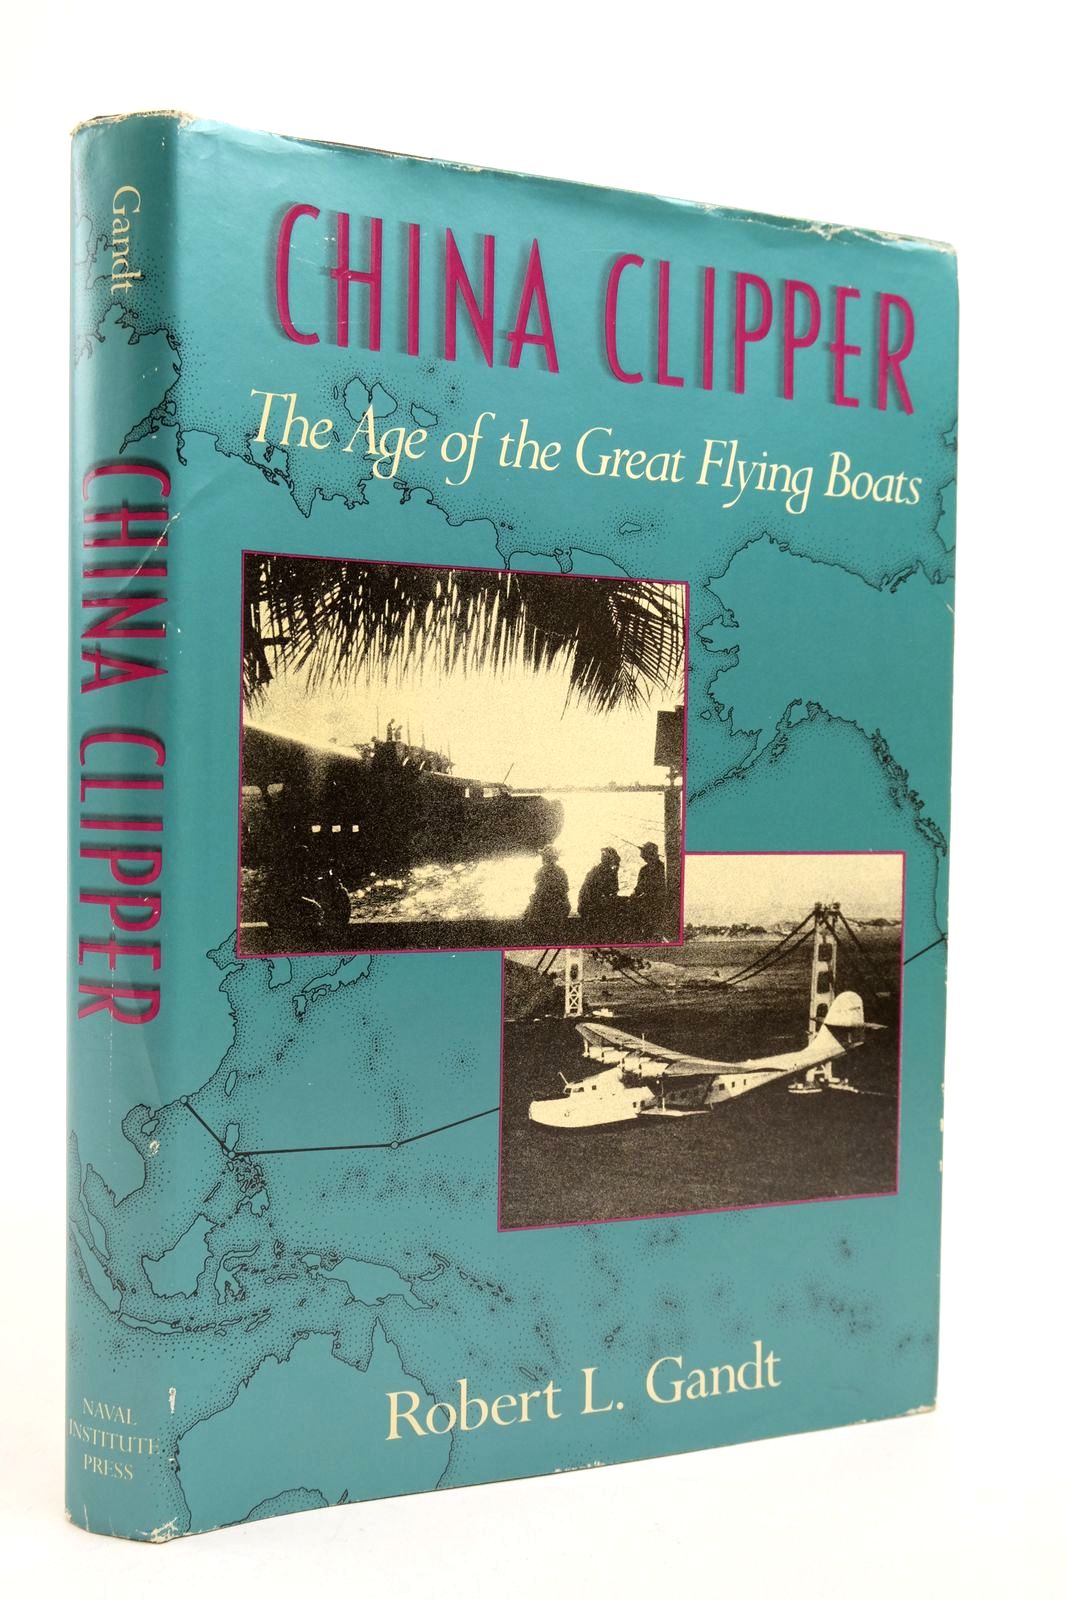 Photo of CHINA CLIPPER THE AGE OF THE GREAT FLYING BOATS written by Gandt, Robert L. published by Naval Institute Press (STOCK CODE: 2139437)  for sale by Stella & Rose's Books